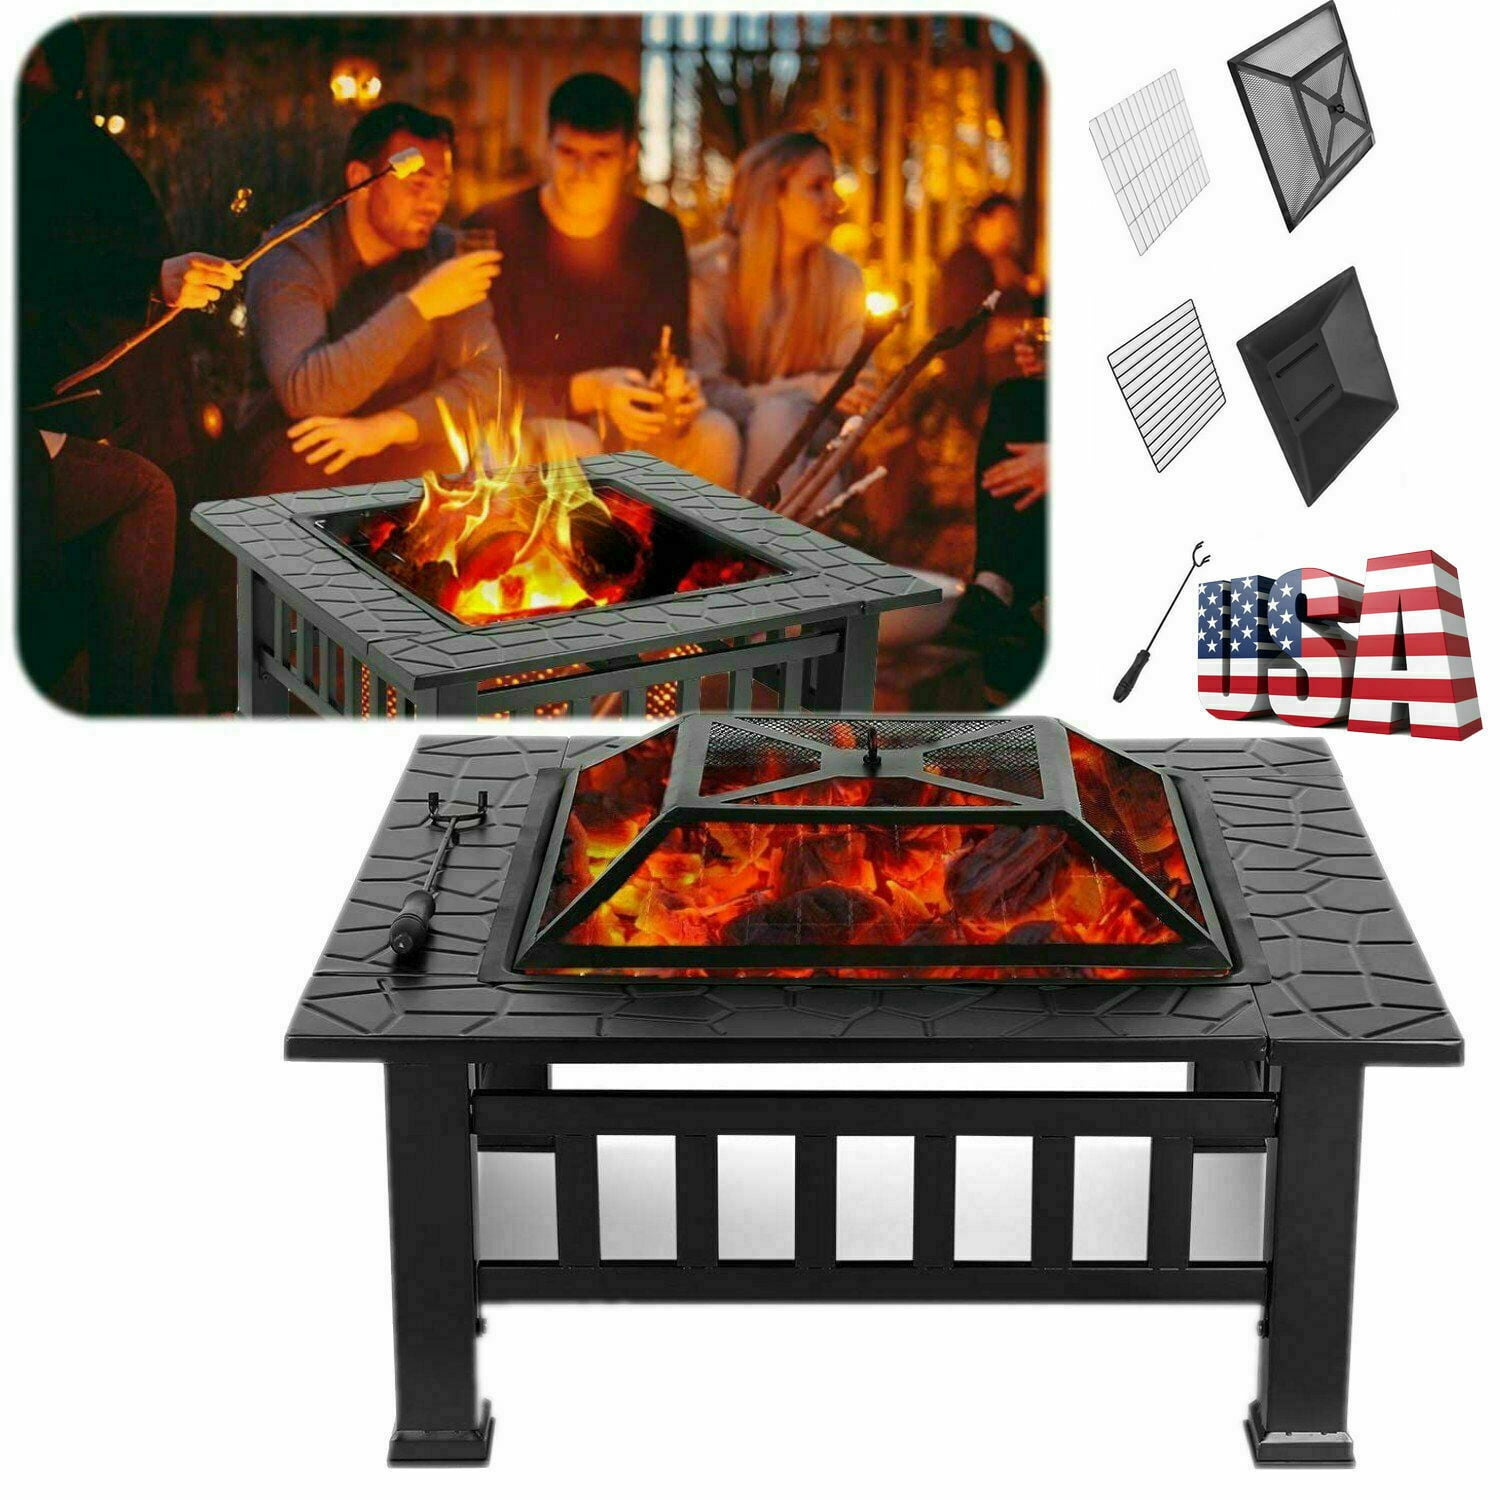 Poker 4 in 1 Square Bowl Wood Burning Fireplace Grill Spark Screen Dining Cover Log Grate 32 Fire Pit Table Outdoor Set Heater Stove/BBQ/Ice Pit Patio Garden Backyard Firepit Mesh Lid 